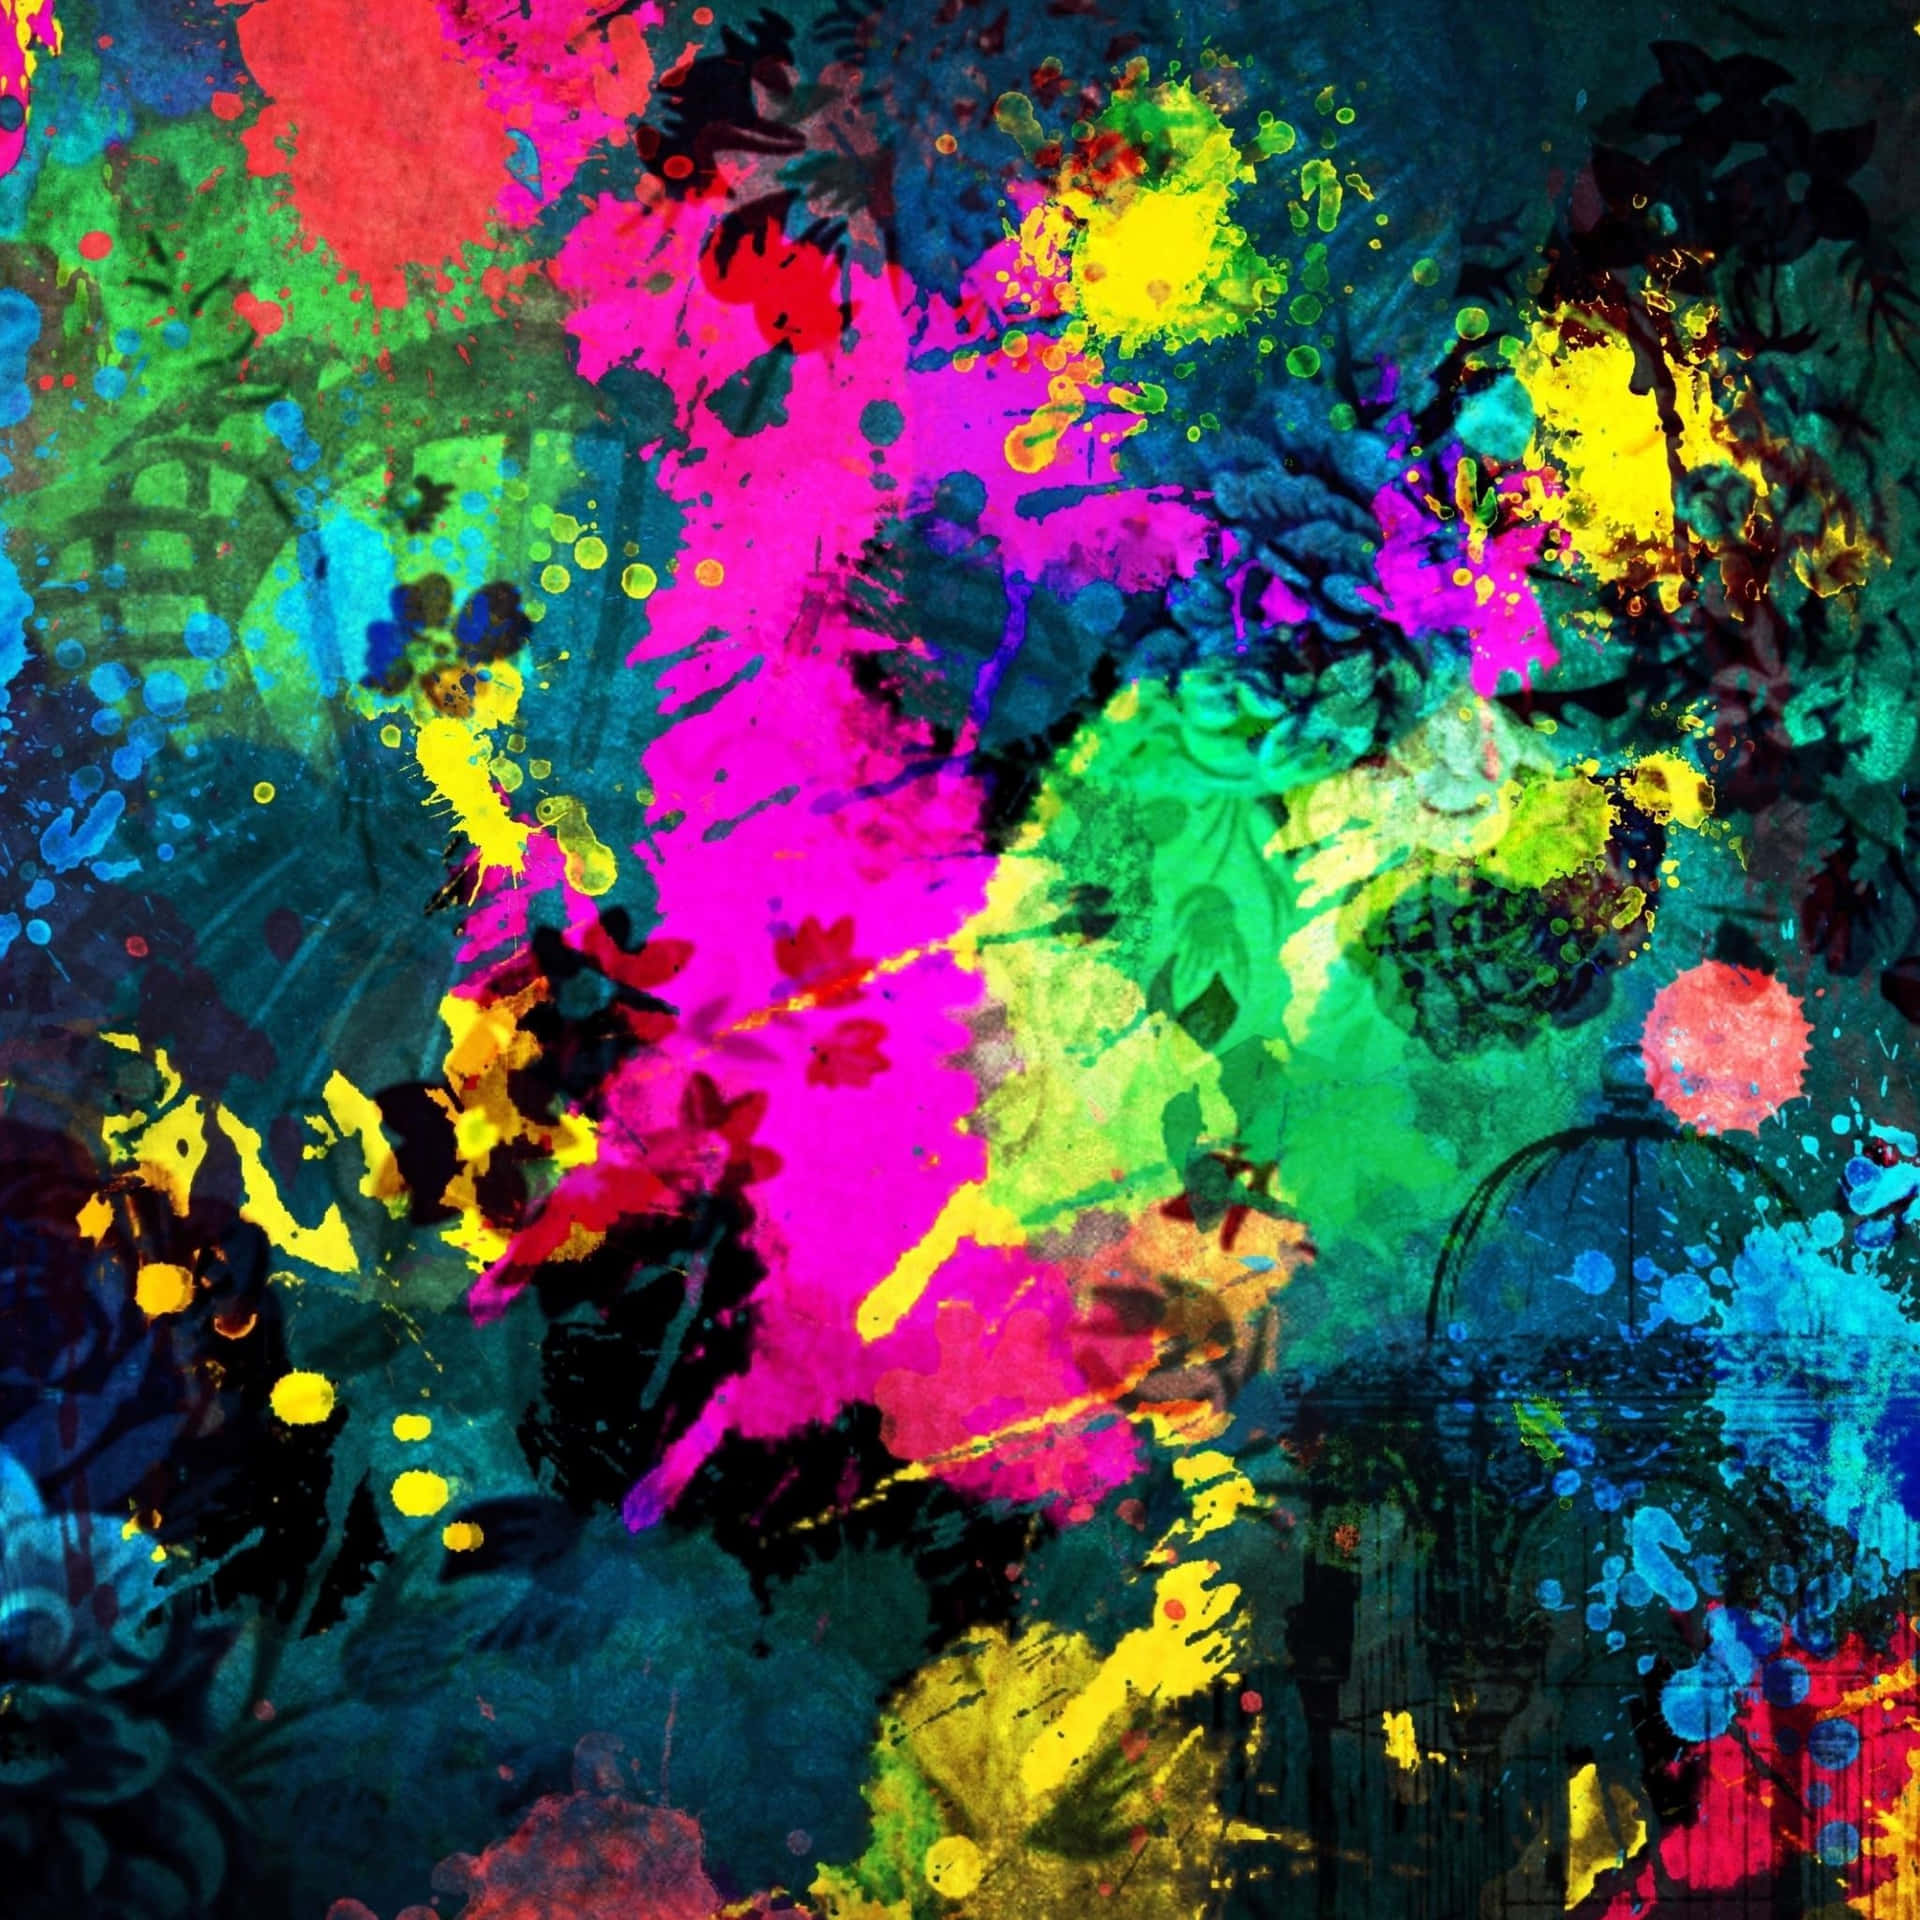 Colorful Paint Splatter iPhone Wallpapers Free Download